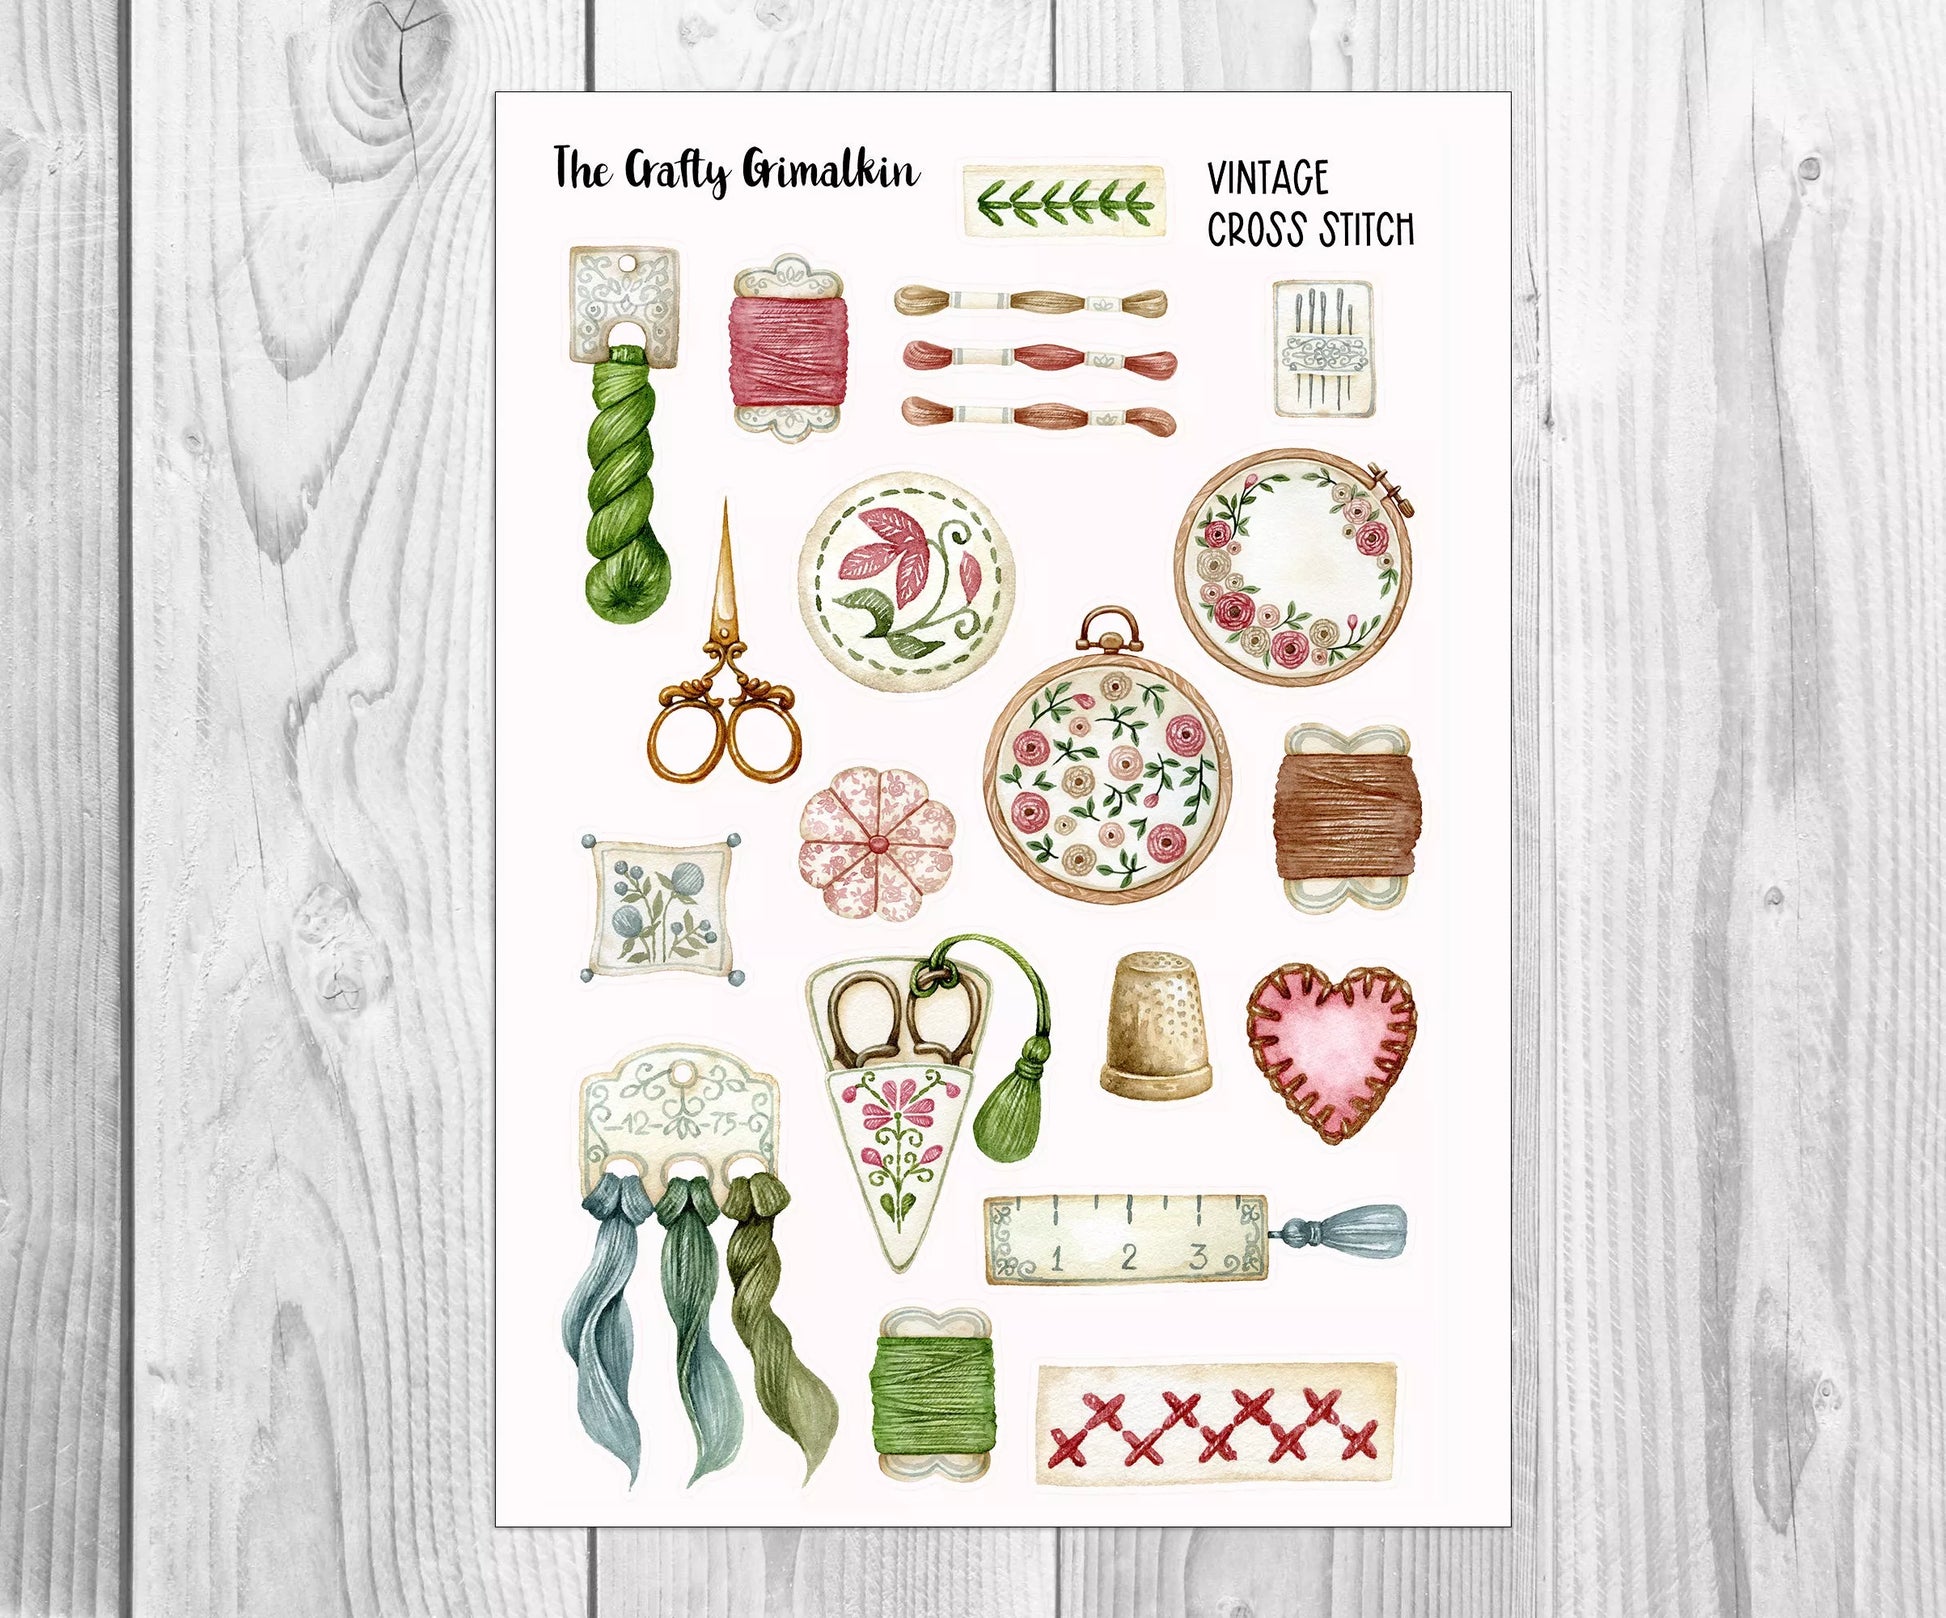 Vintage Cross Stitch Sticker Sheet for planners and/ or Scrapbooks - Large Size, Decorative Stickers, Decorative Stickers, The Crafty Grimalkin - A Cross Stitch Store